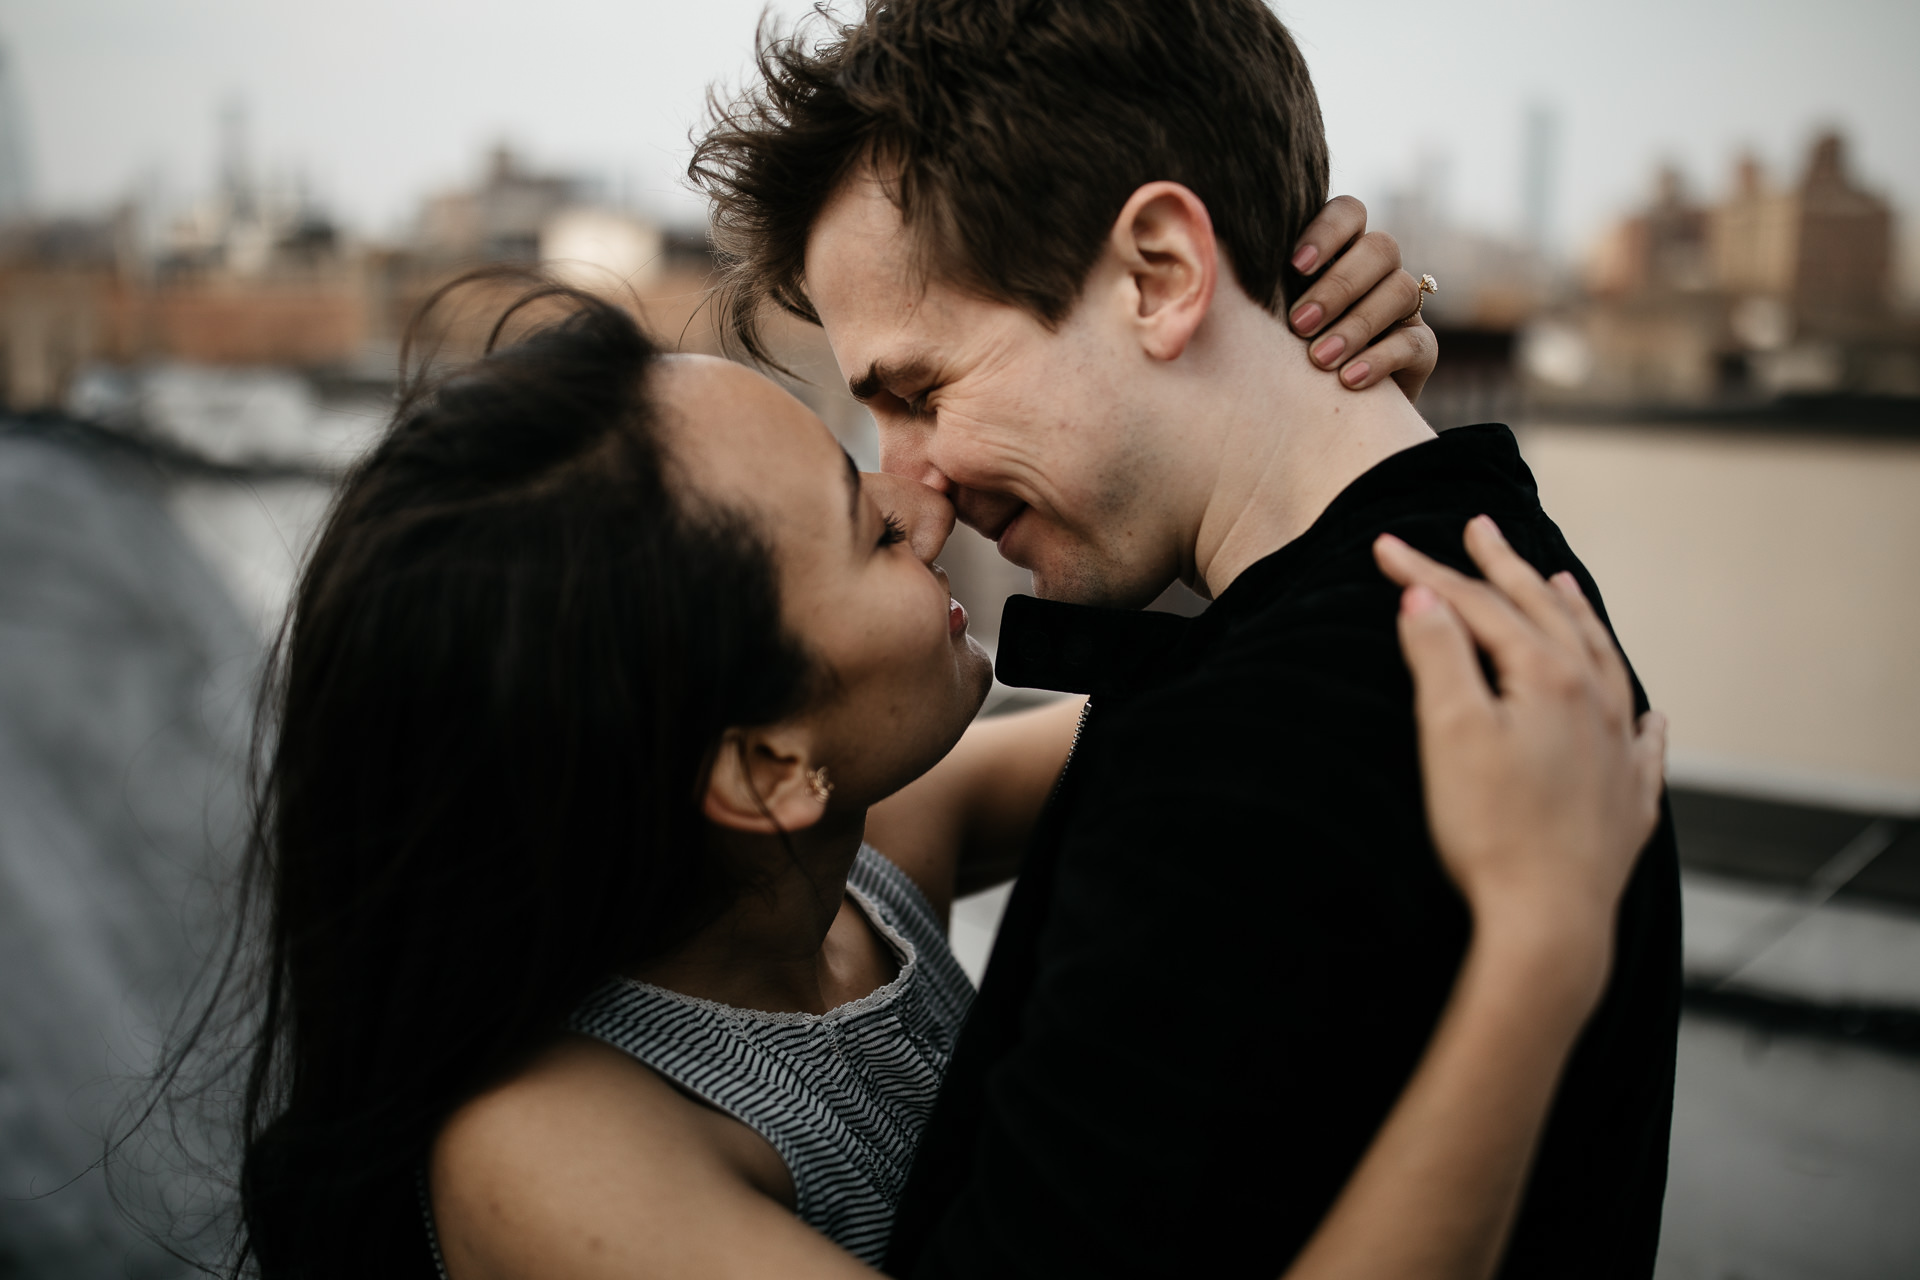 Kelly & Wells Engagement in West Village, New York, by Jean-Laurent Gaudy